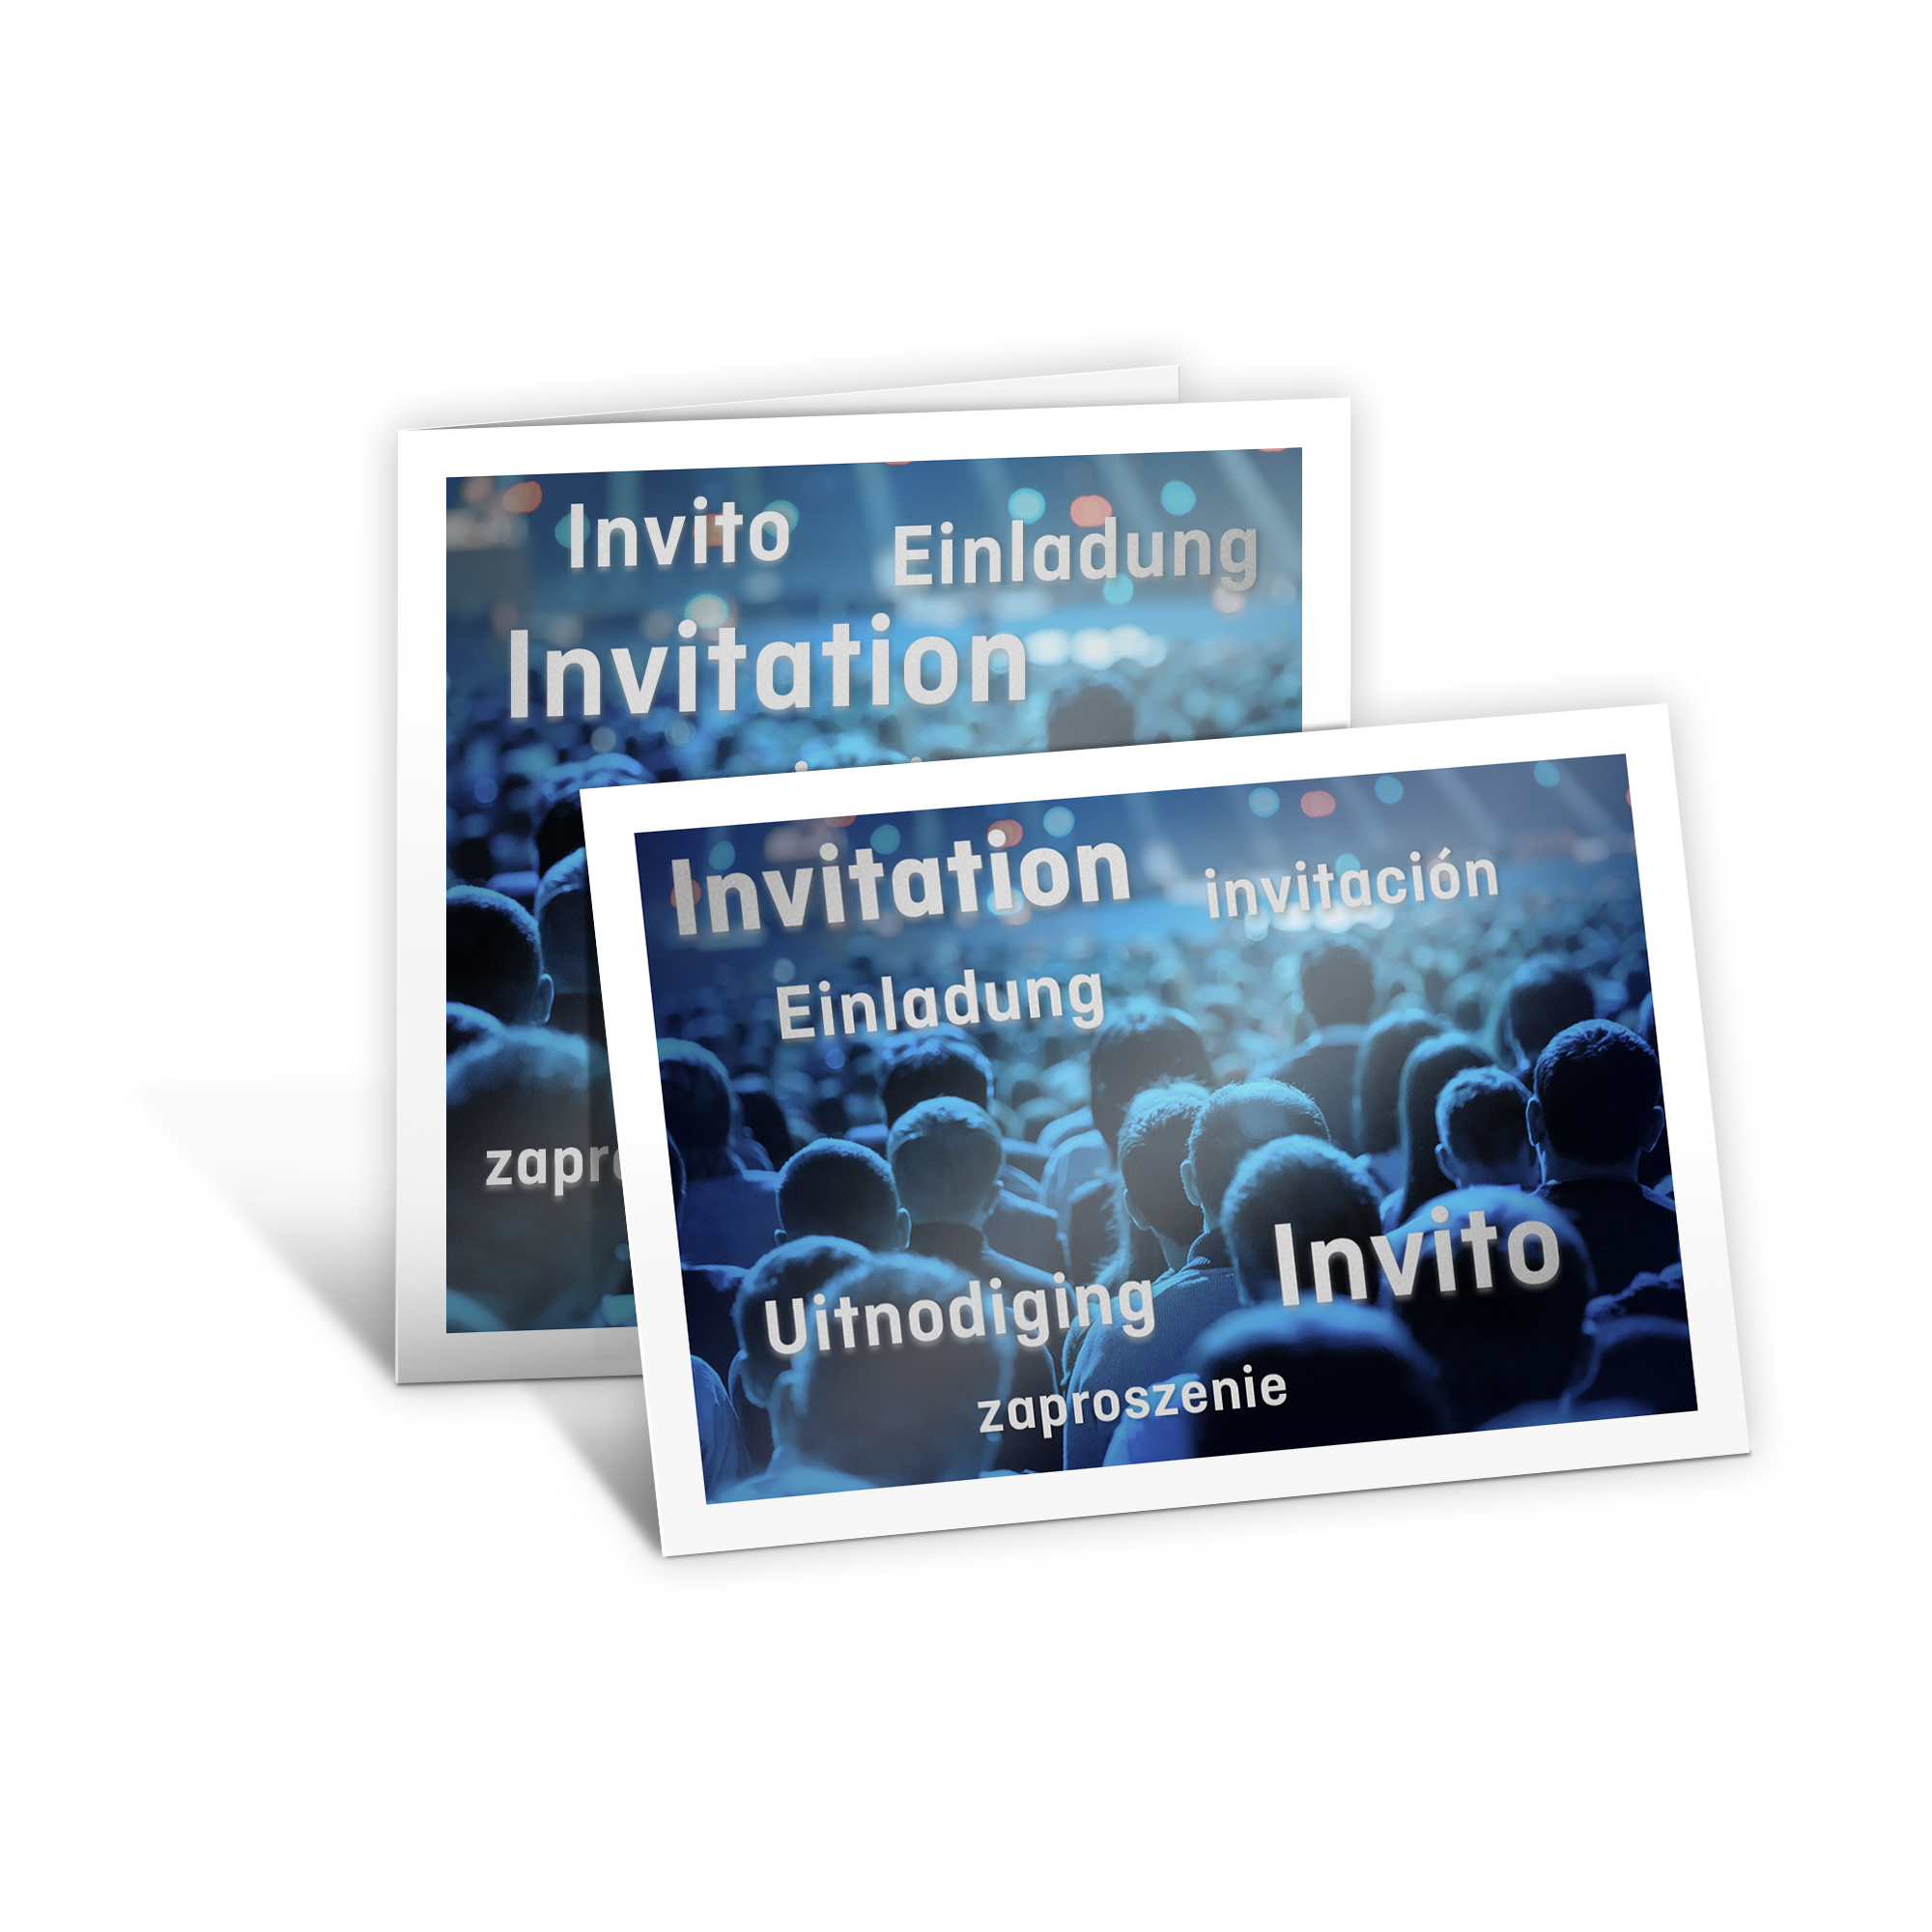 Invitation cards with special-effect colours